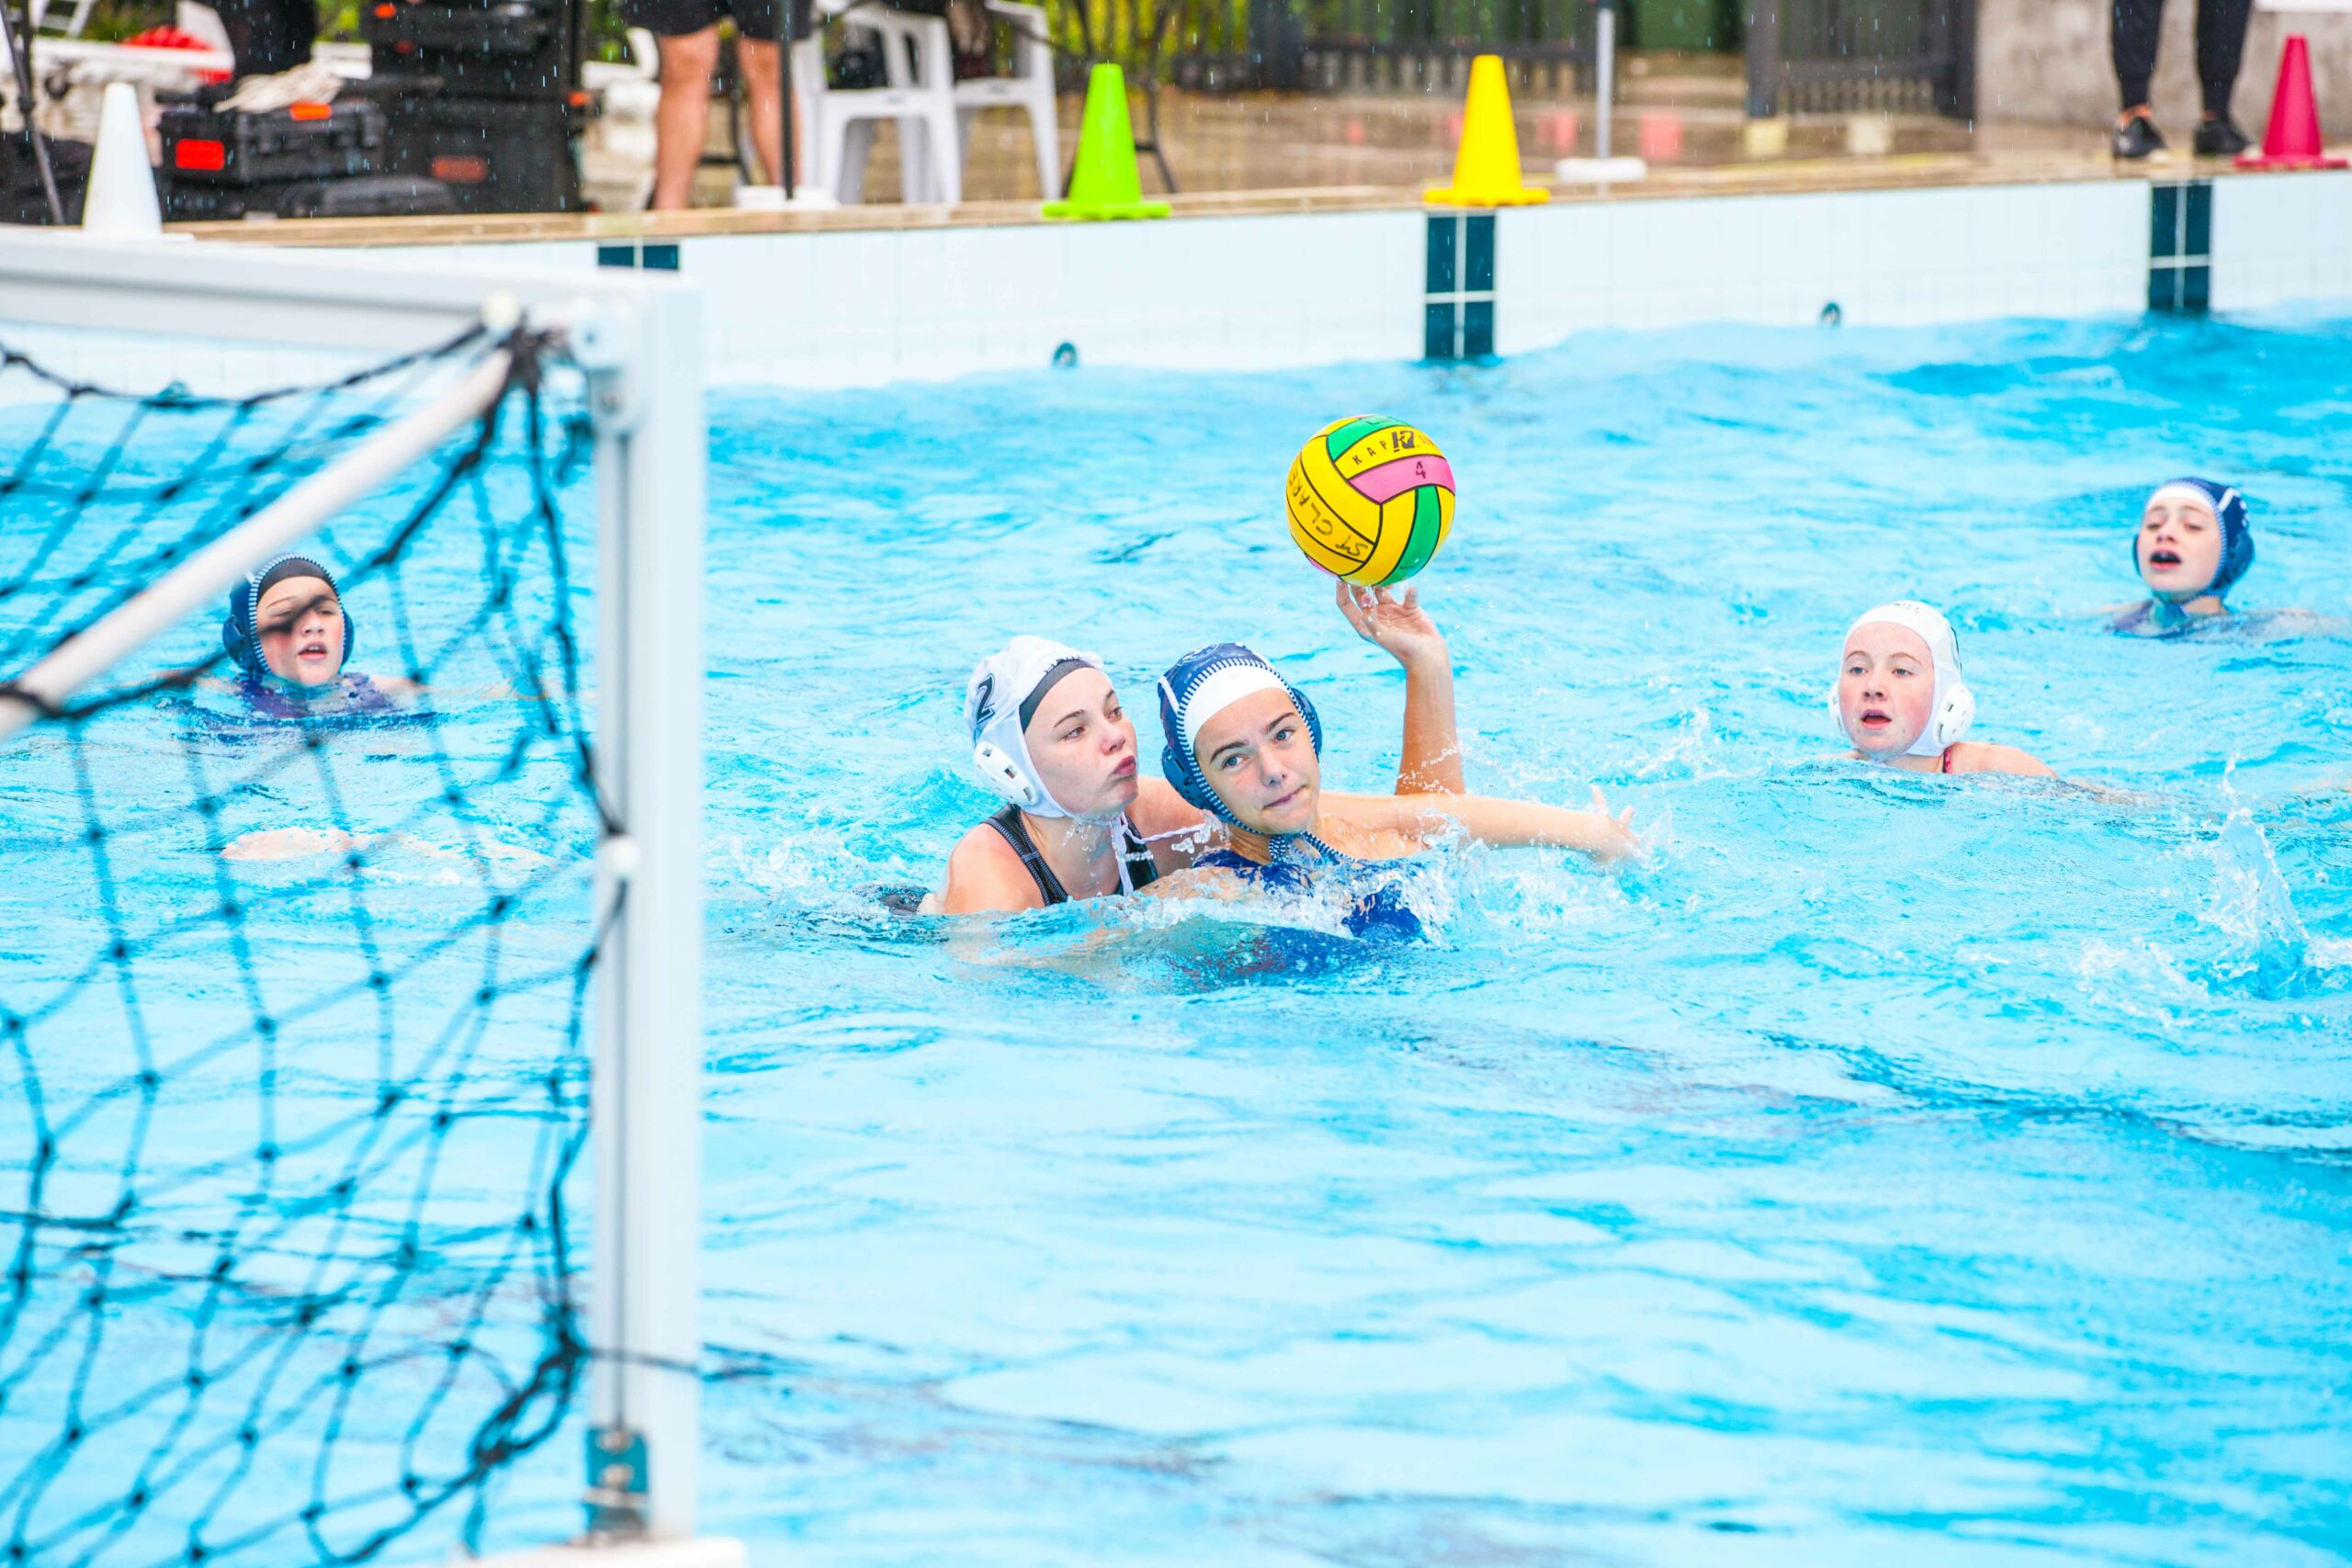 Pool action in Sydney Catholic Schools' 2022 Water Polo Championships